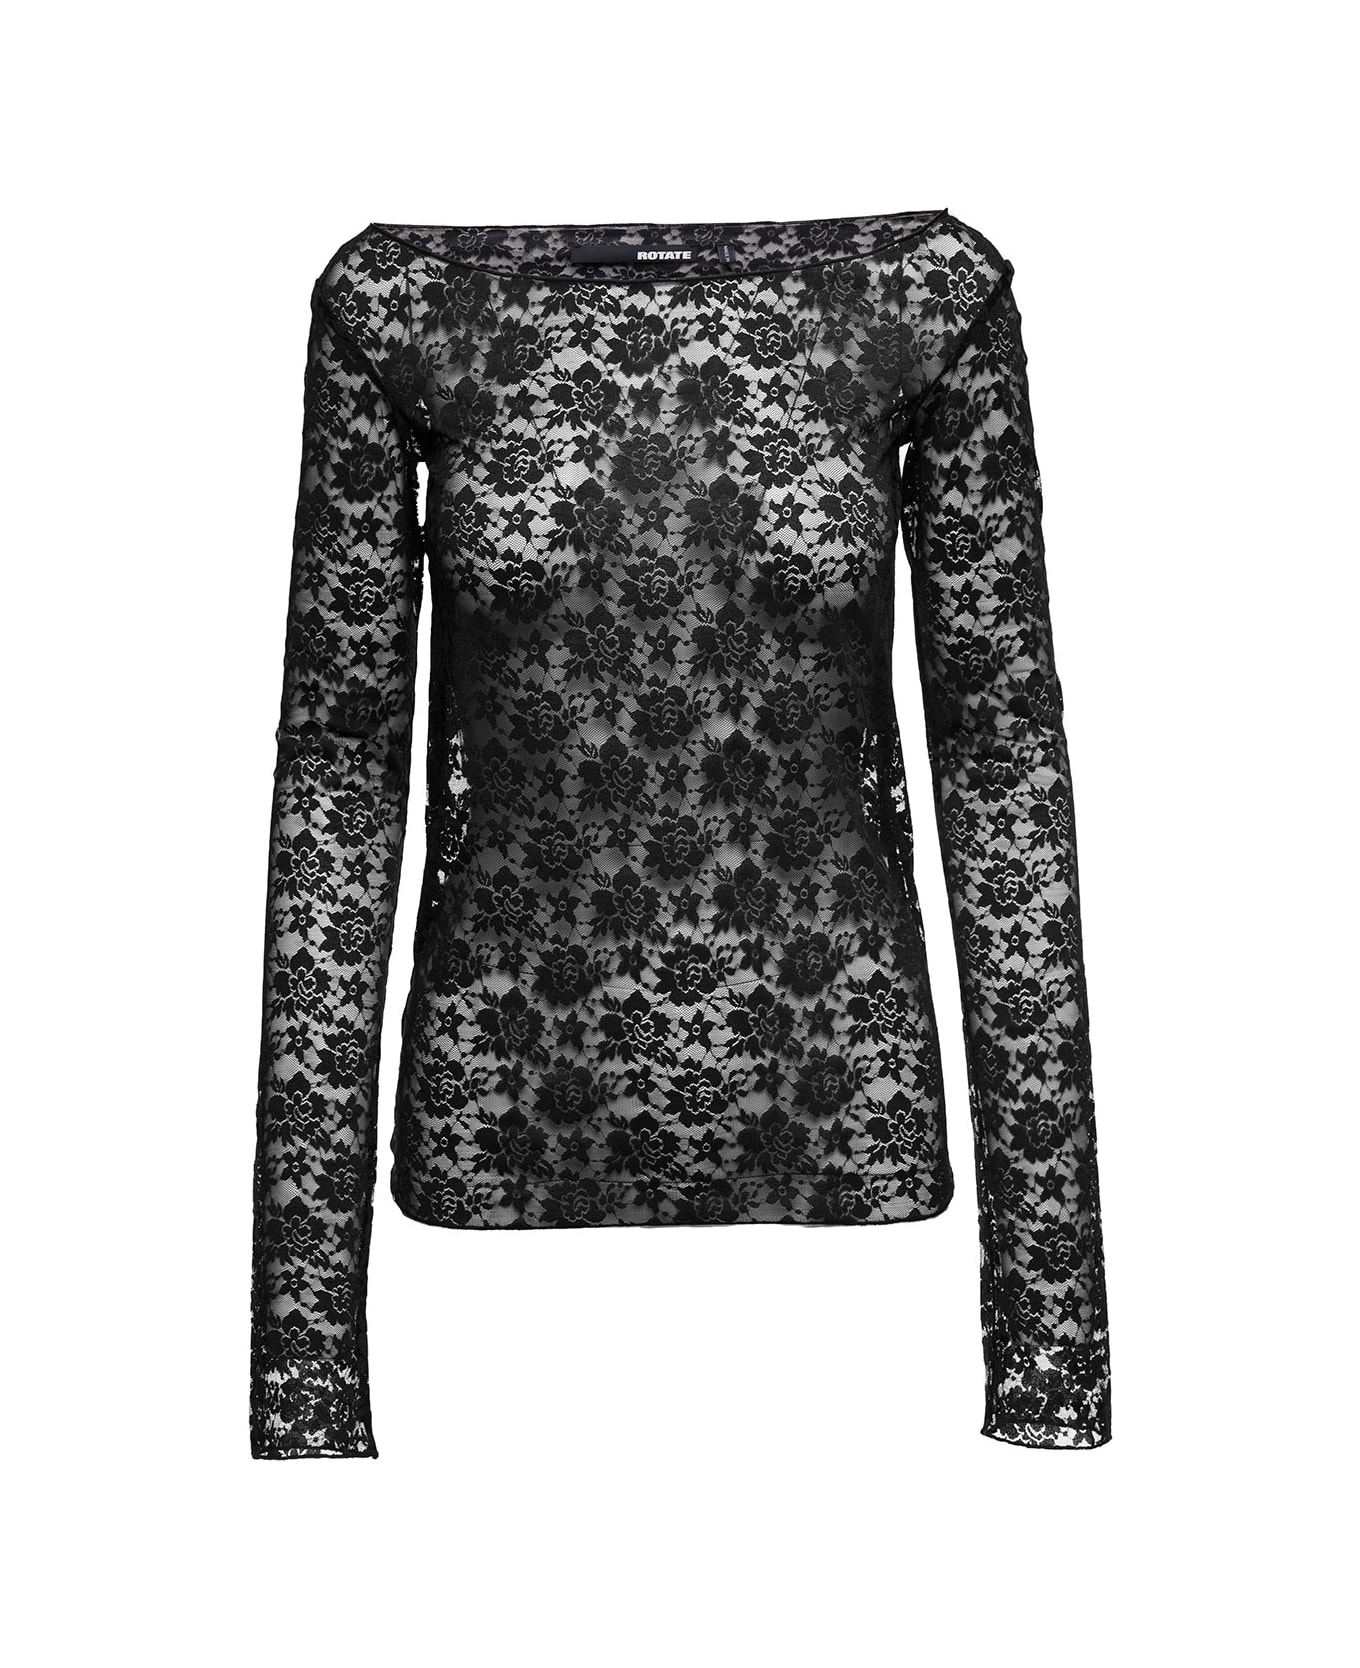 Rotate by Birger Christensen Black Long Sleeve Top With Boat Neckine In Lace Woman - Black